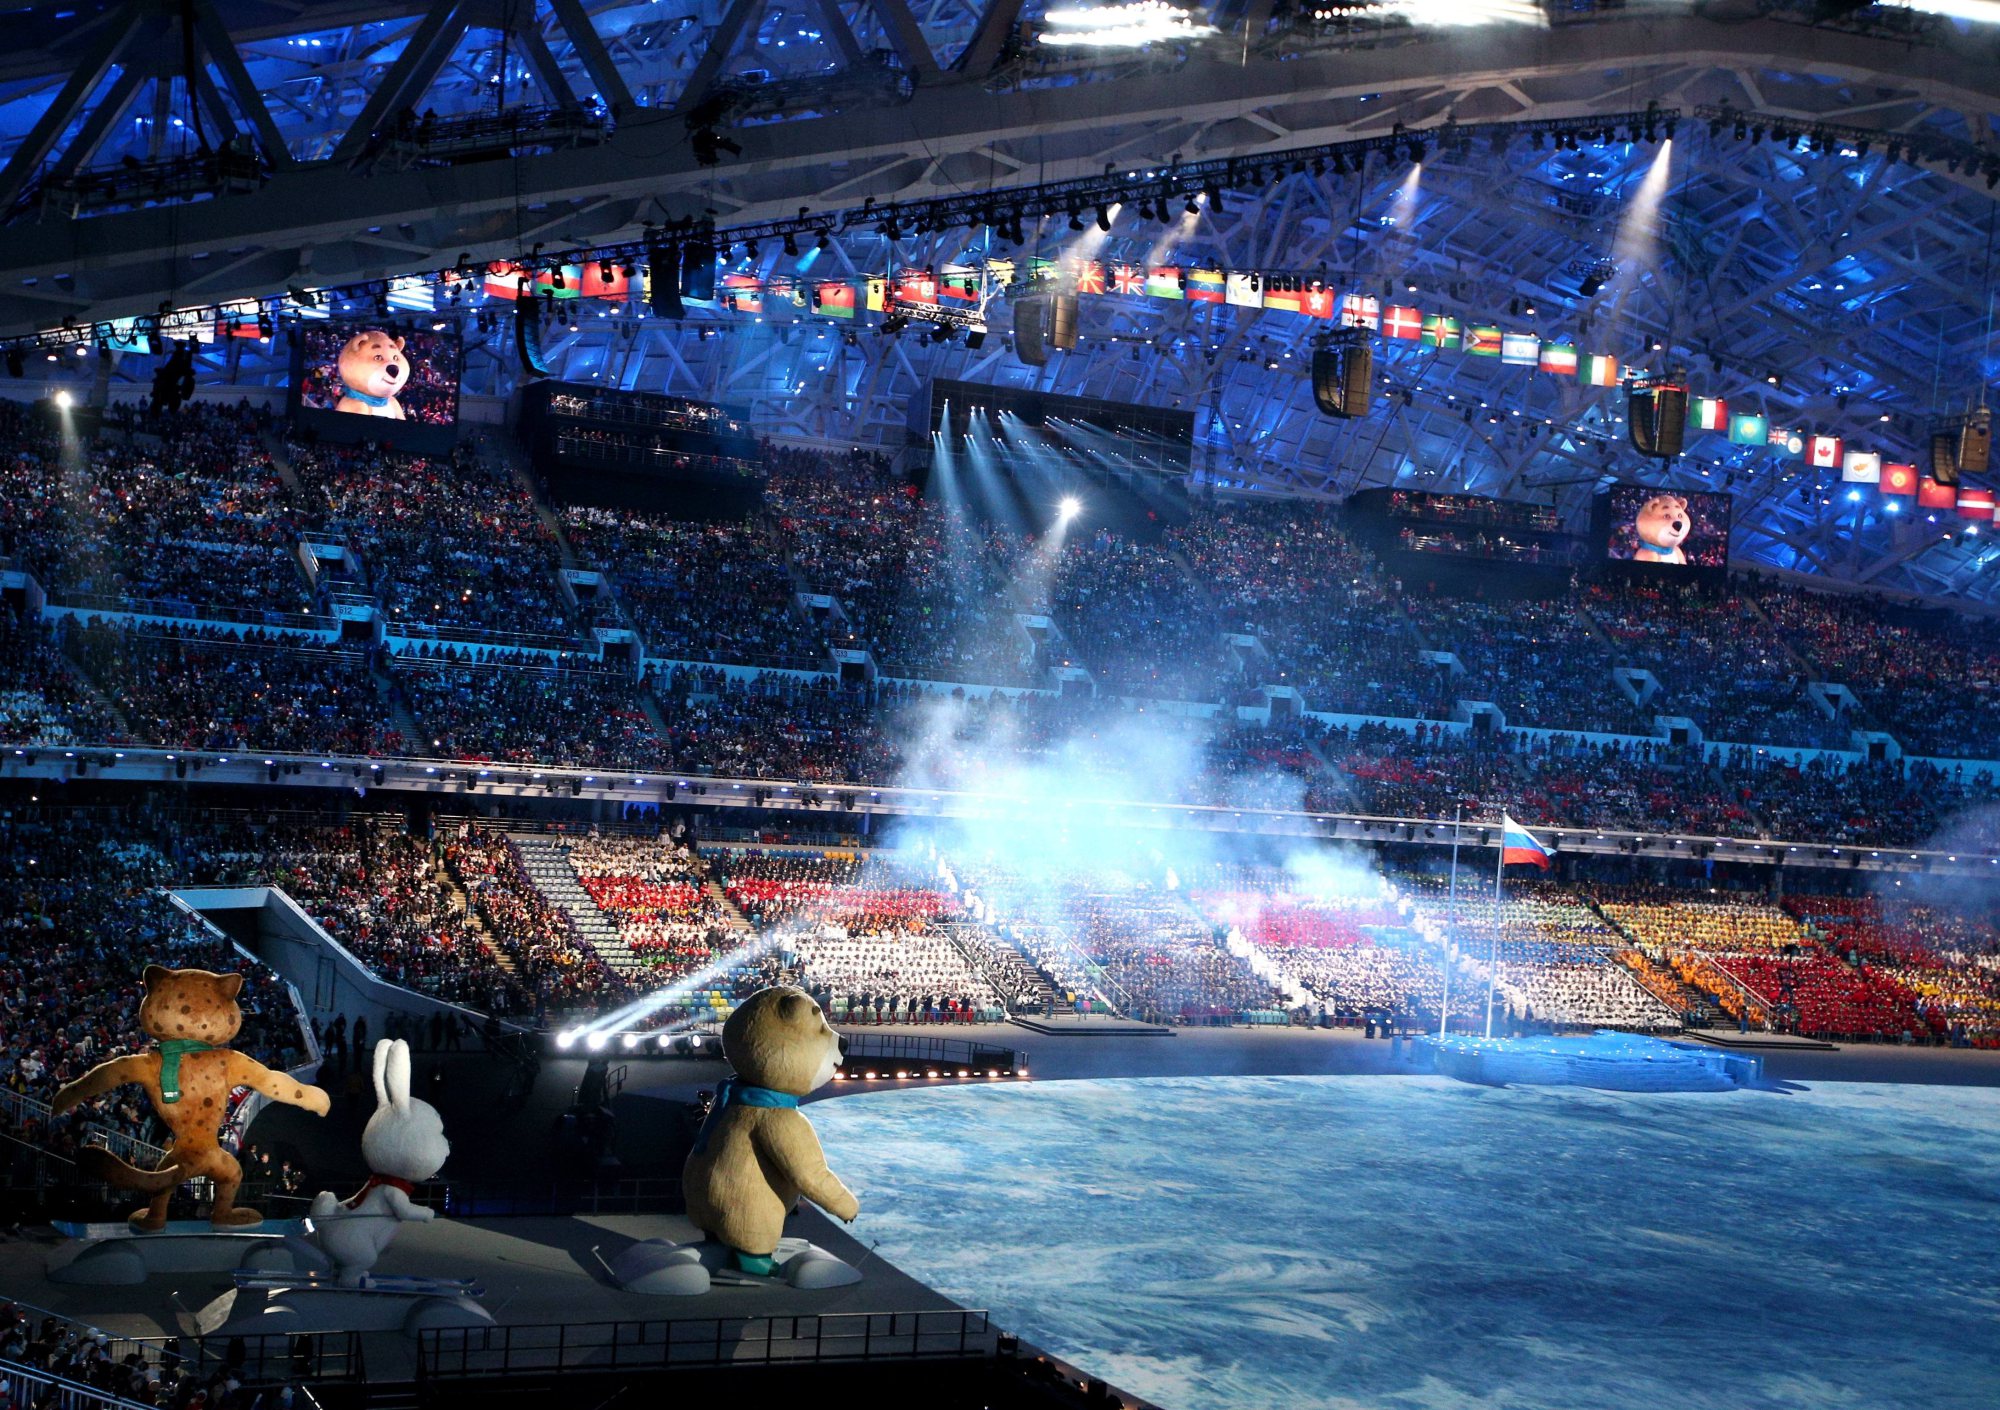 Sochi 2014 mascots prepare to come on stage during the opening ceremony.